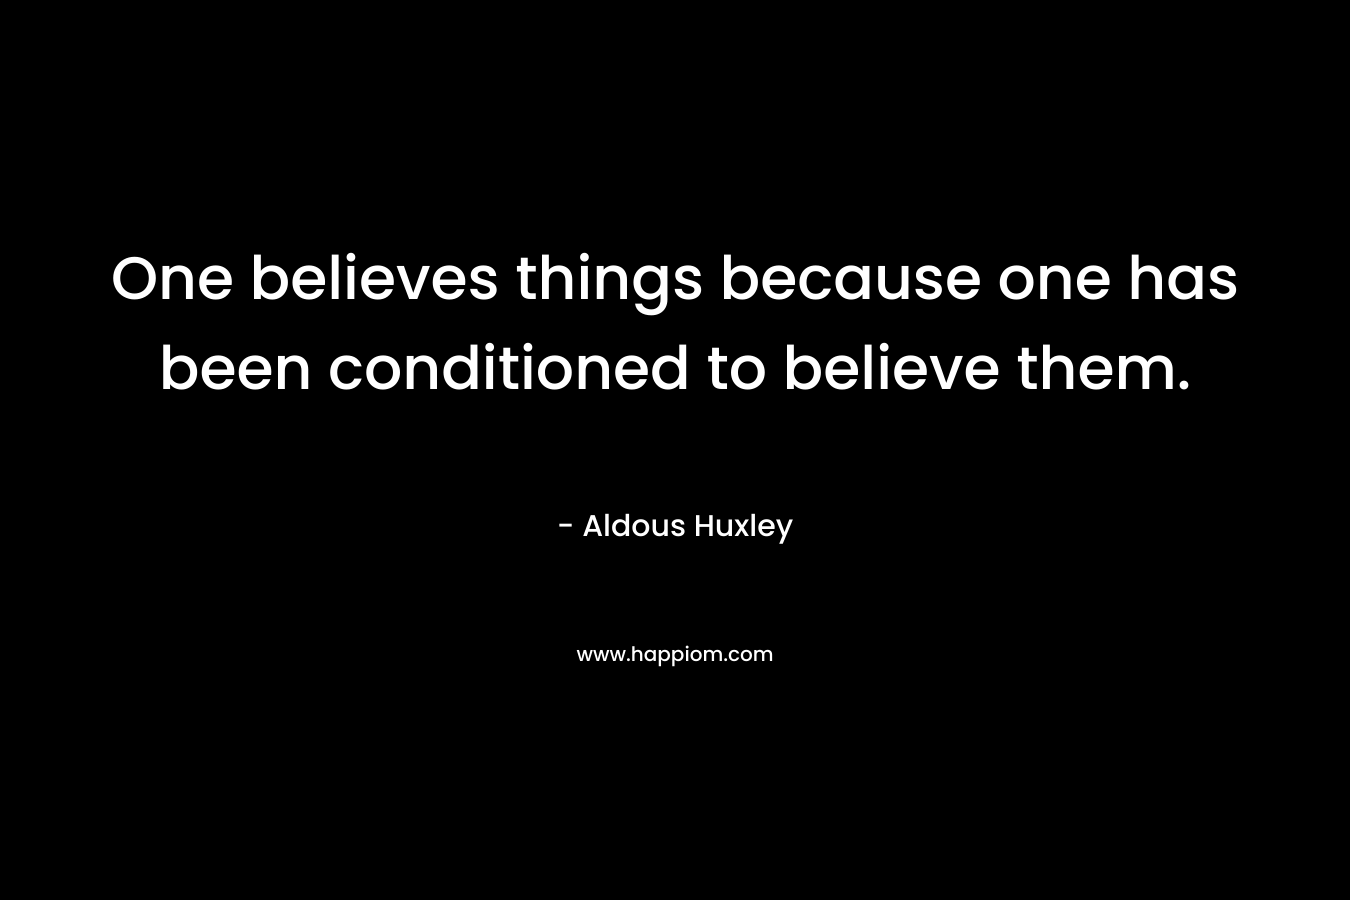 One believes things because one has been conditioned to believe them.